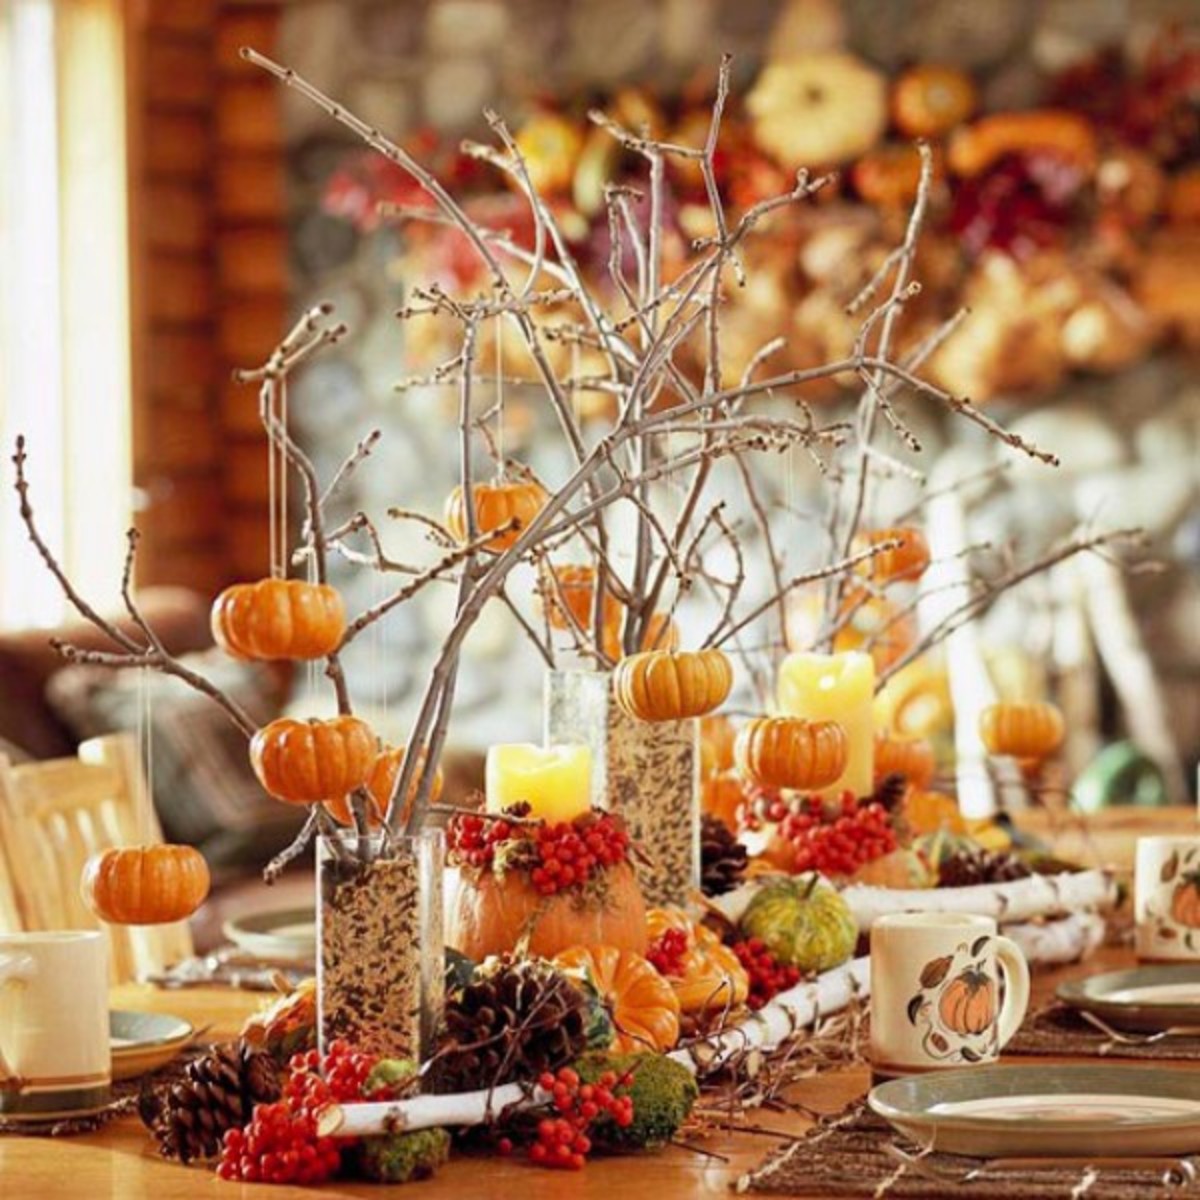 Vases filled with whimsical "pumpkin trees" are eye-catching.